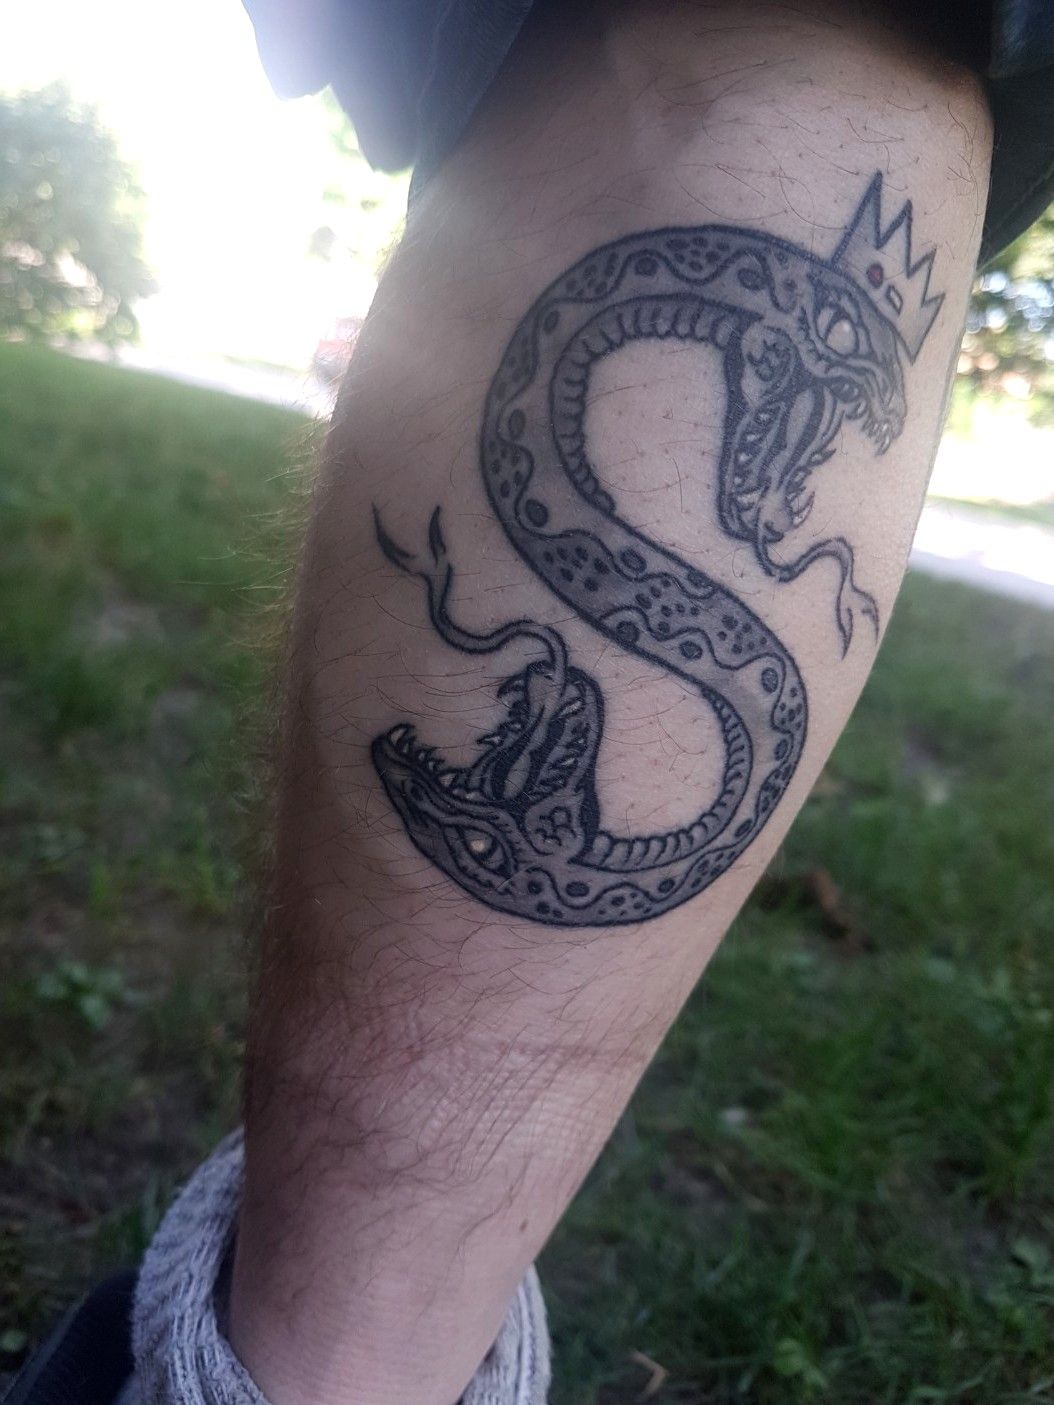 Riverdale Makeup Artist on the Series Serpents Tattoos